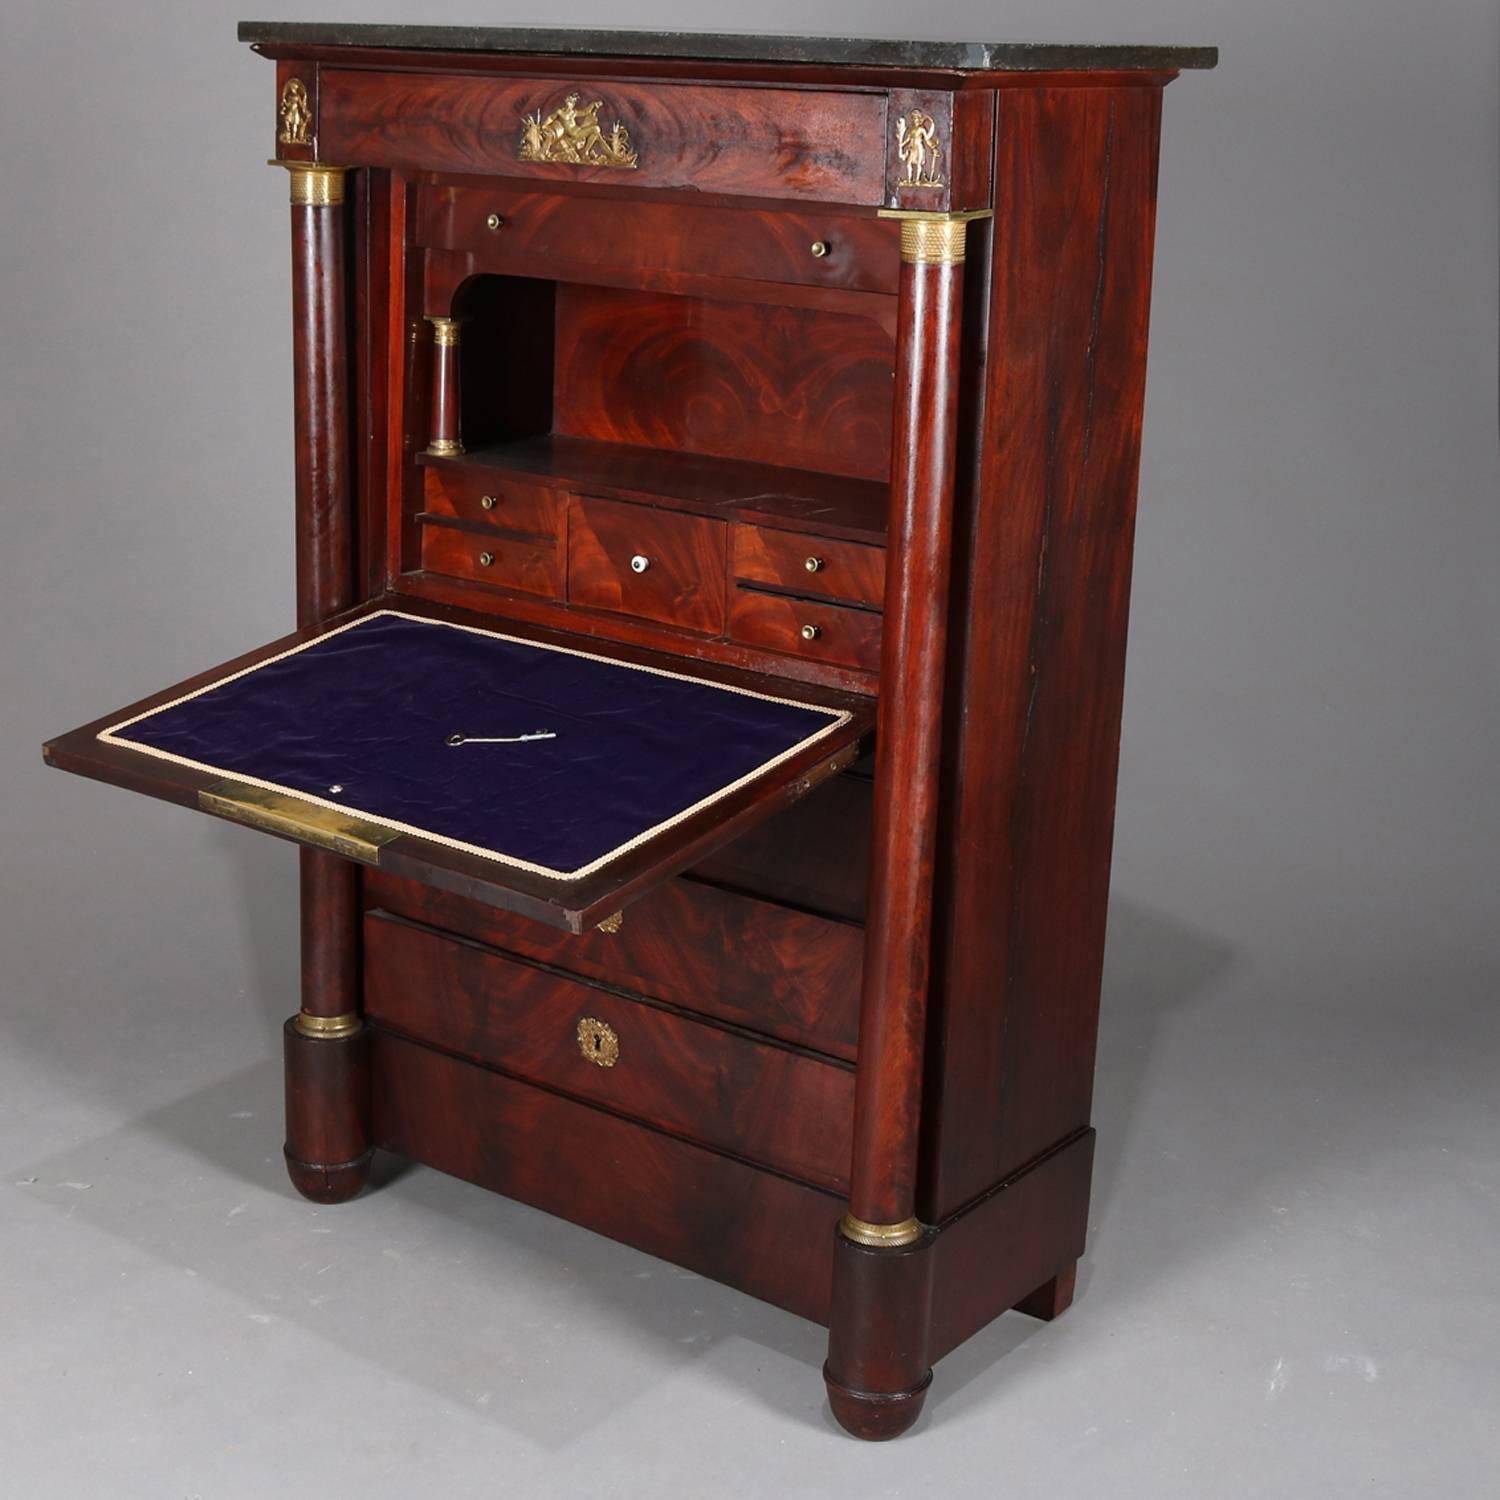 Antique Second Empire French secrétaire à abattant features flame mahogany construction with long drawer above bookmatched drop front desk opening to writing surface with pigeon holes and small drawers above three long drawers and flanked by full